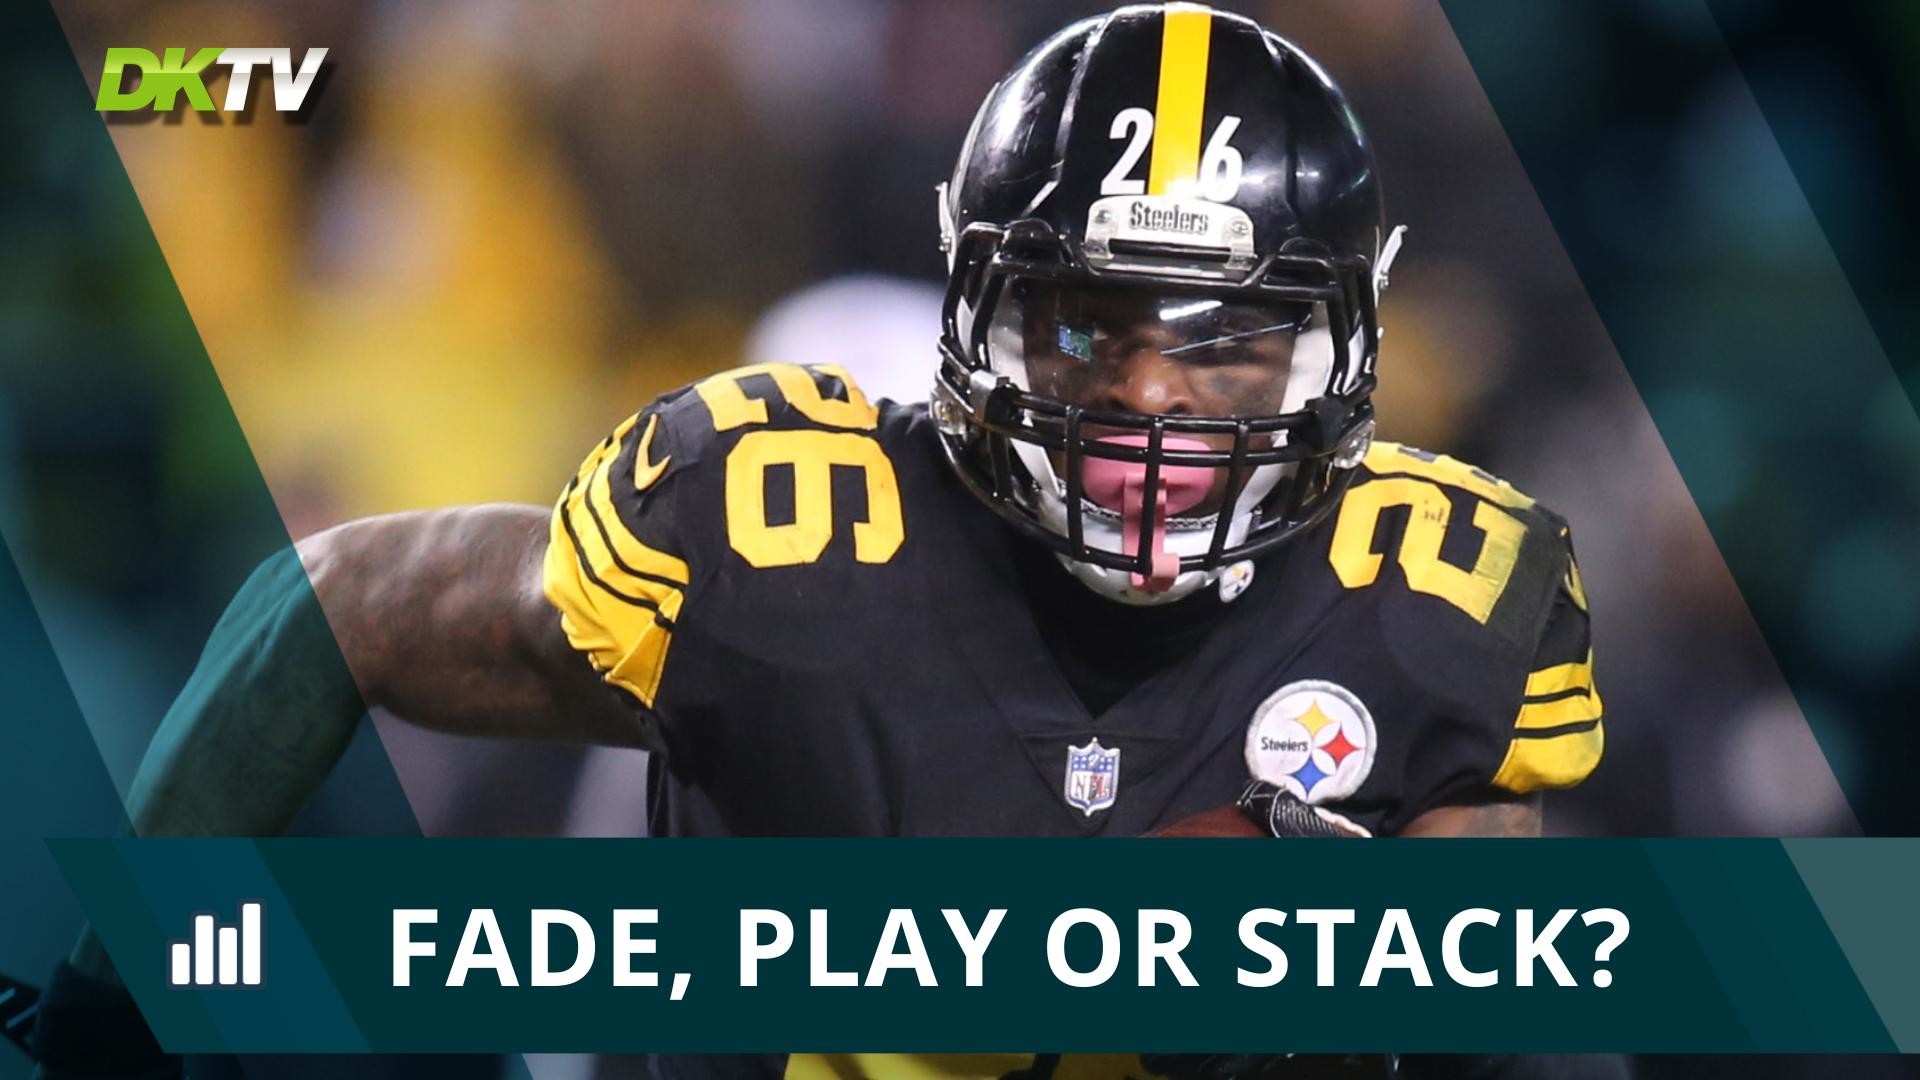 1920x1080 Fade, Play or Stack Le'Veon Bell?